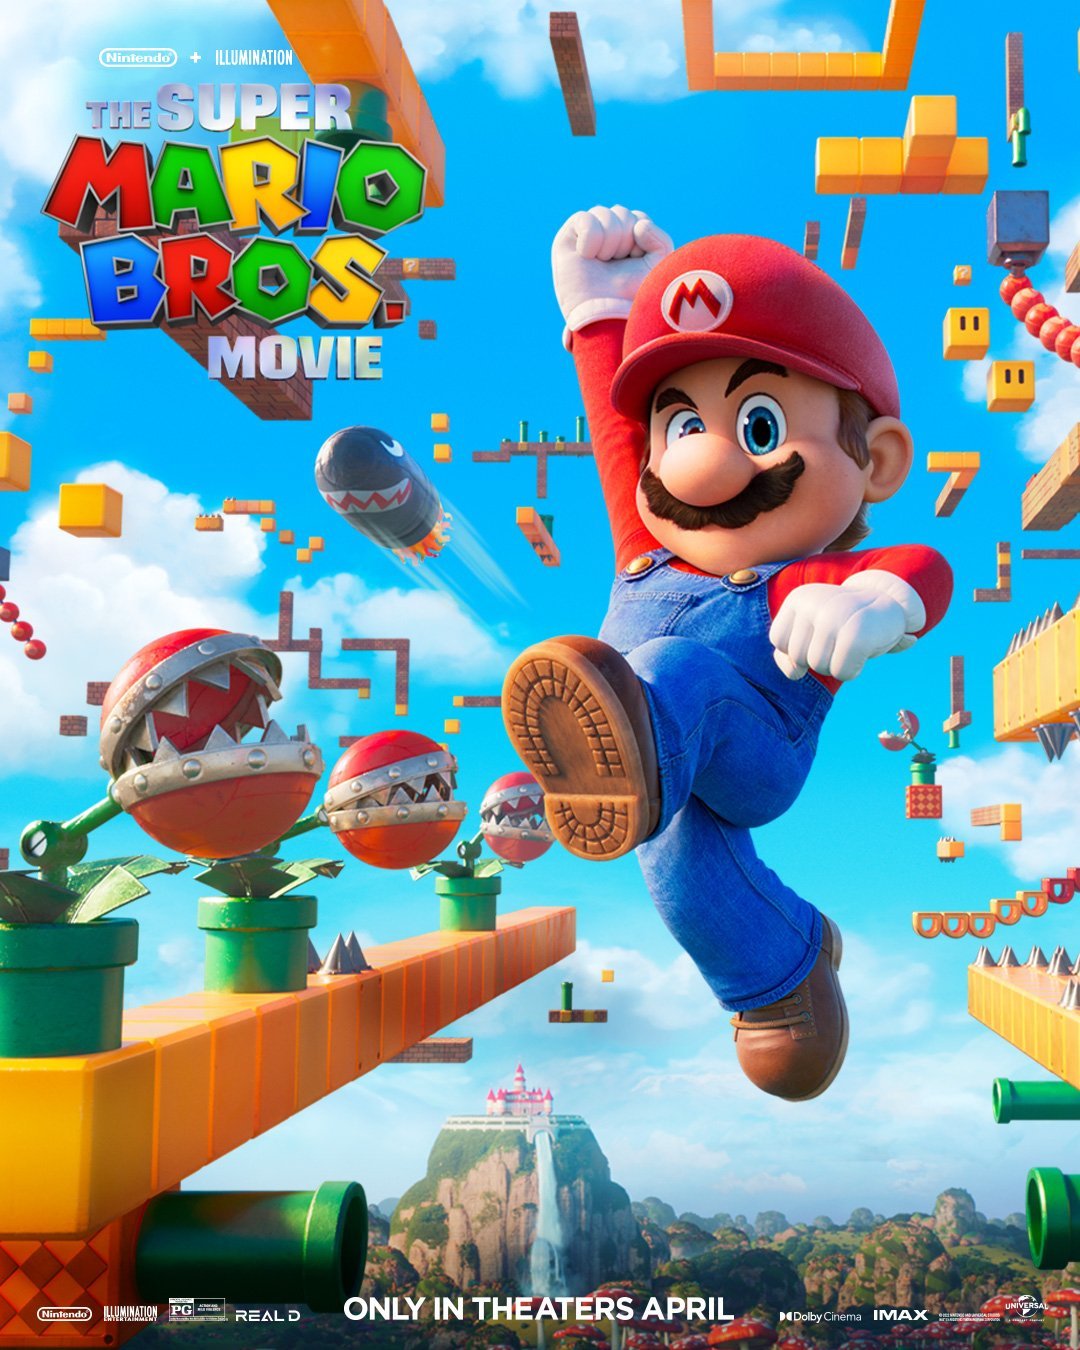 New Posters Revealed For The Super Mario Bros. Movie, Take A Look